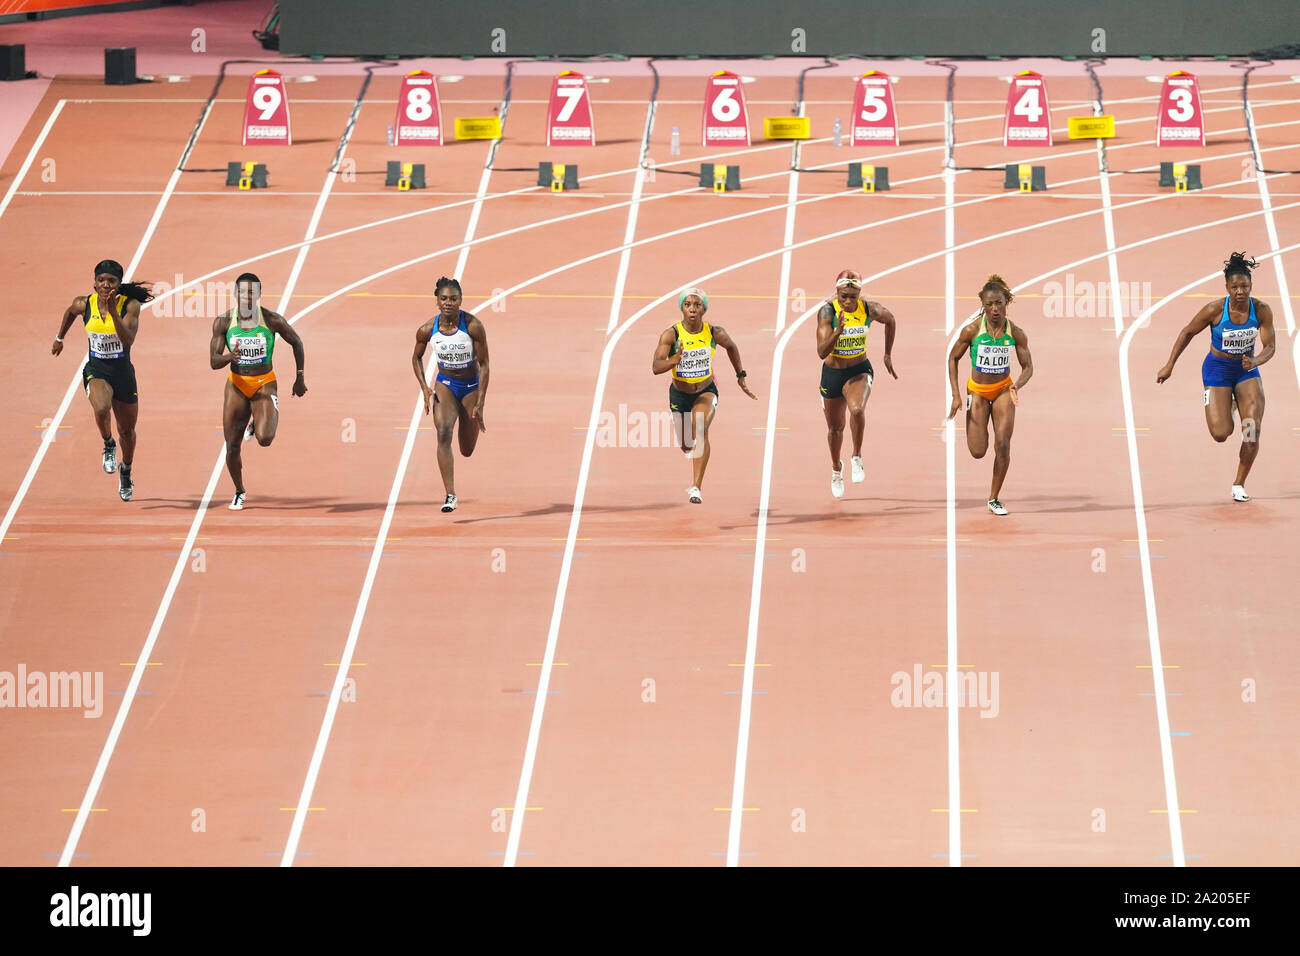 Doha, Qatar. 29th Sep, 2019. Athletes compete during the Women's 100 Meters Final at the 2019 IAAF World Championships in Doha, Qatar, Sept. 29, 2019. Credit: Wang Jingqiang/Xinhua/Alamy Live News Stock Photo